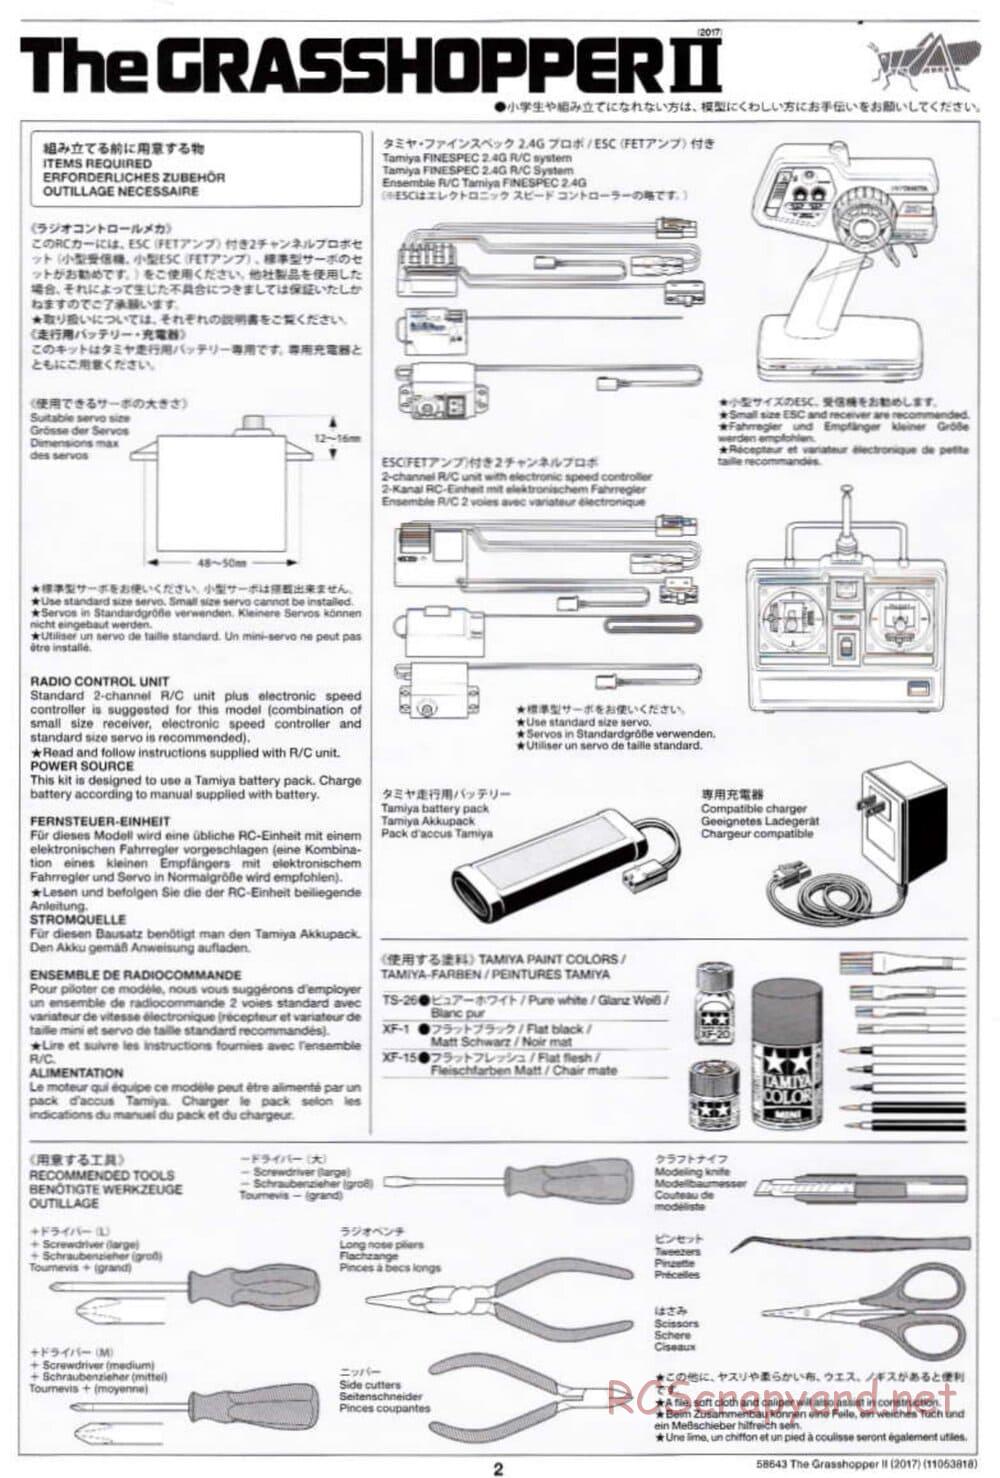 Tamiya - The Grasshopper II (2017) - GH Chassis - Manual - Page 2